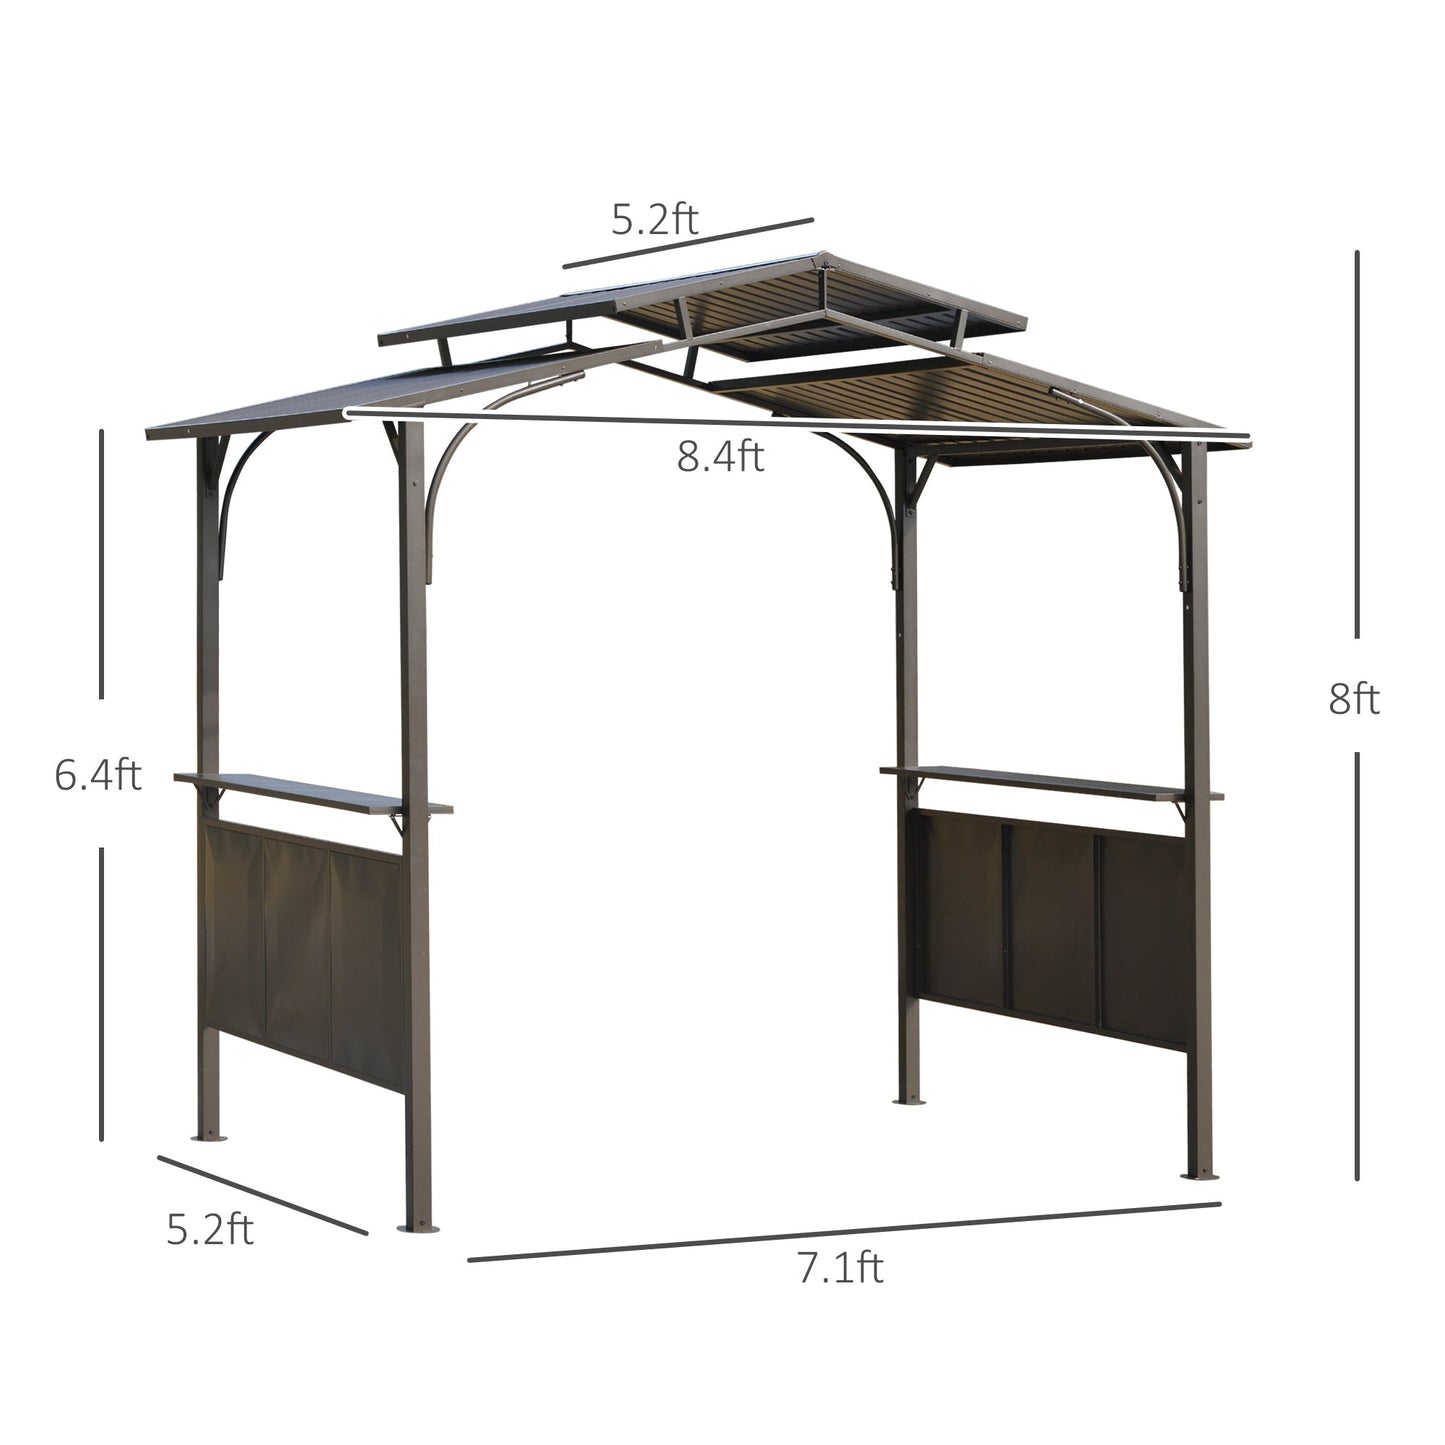 Outdoor and Garden-8'x5' BBQ Grill Gazebo with 2 Side Shelves, Outdoor Double Tiered Interlaced Polycarbonate Roof with Steel Frame, Brown - Outdoor Style Company